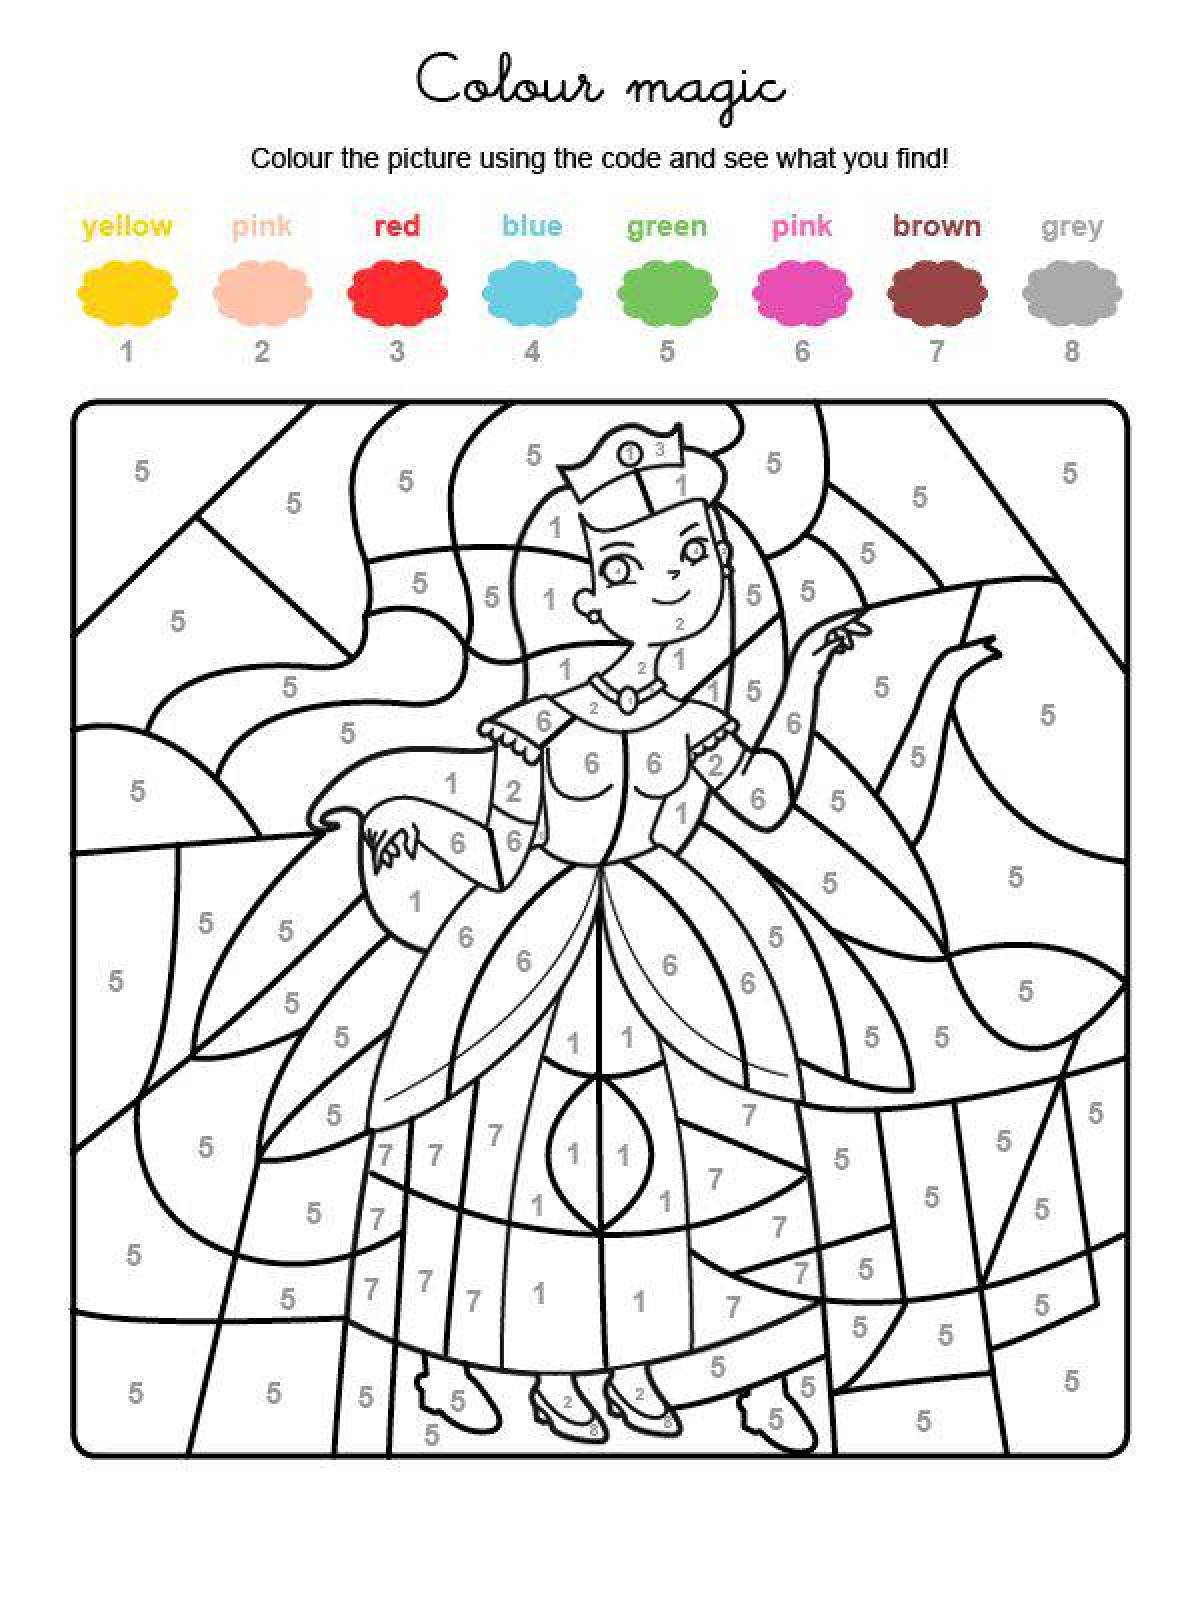 Wonderful coloring by numbers for girls